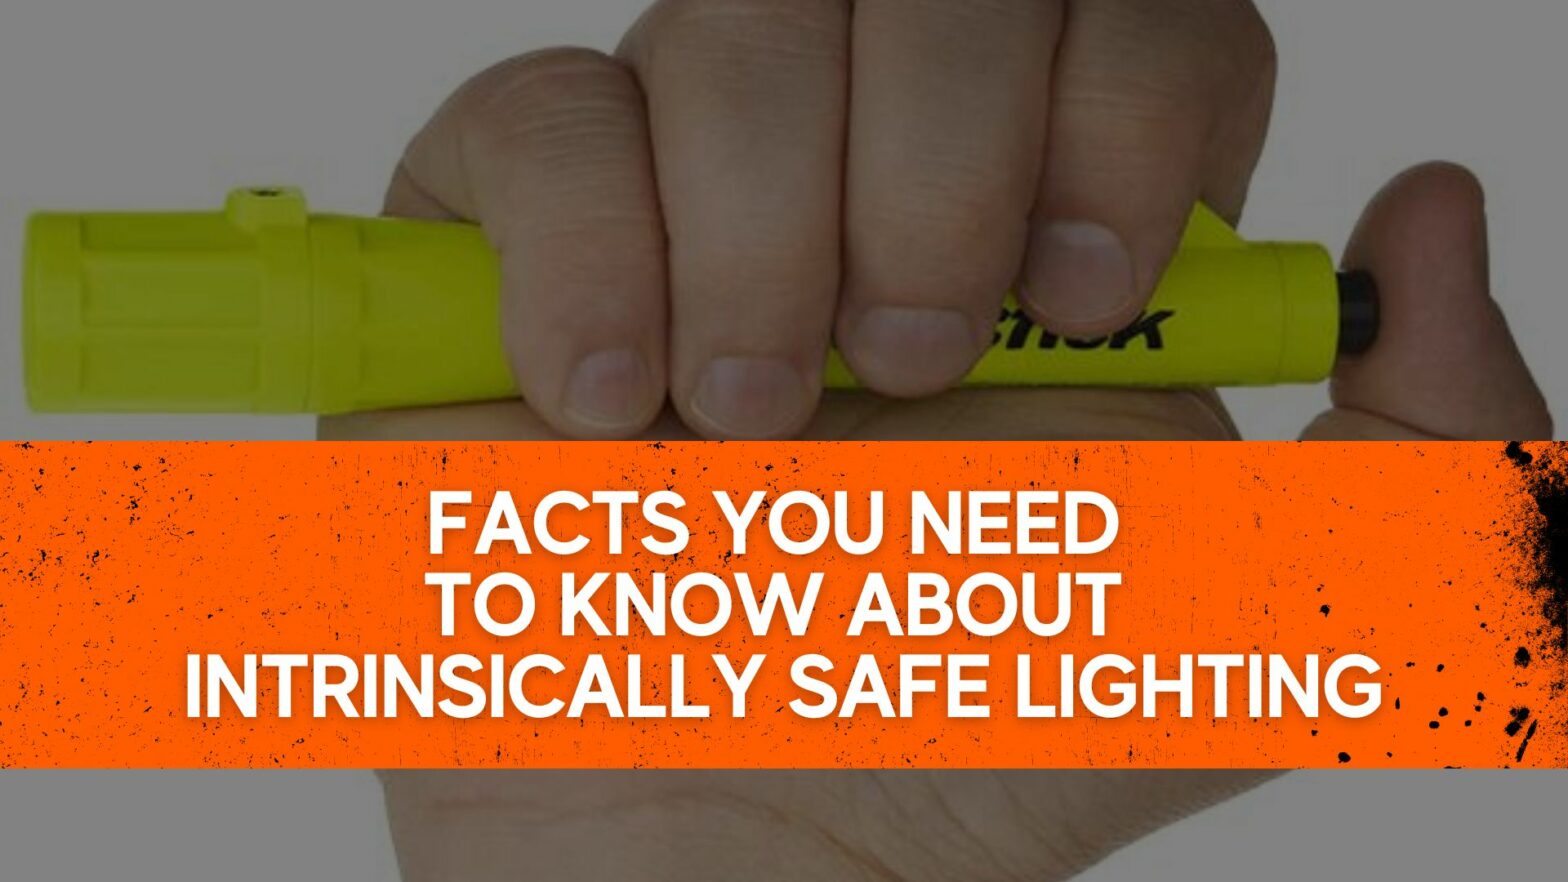 Facts You Need to Know about Intrinsically Safe Lighting